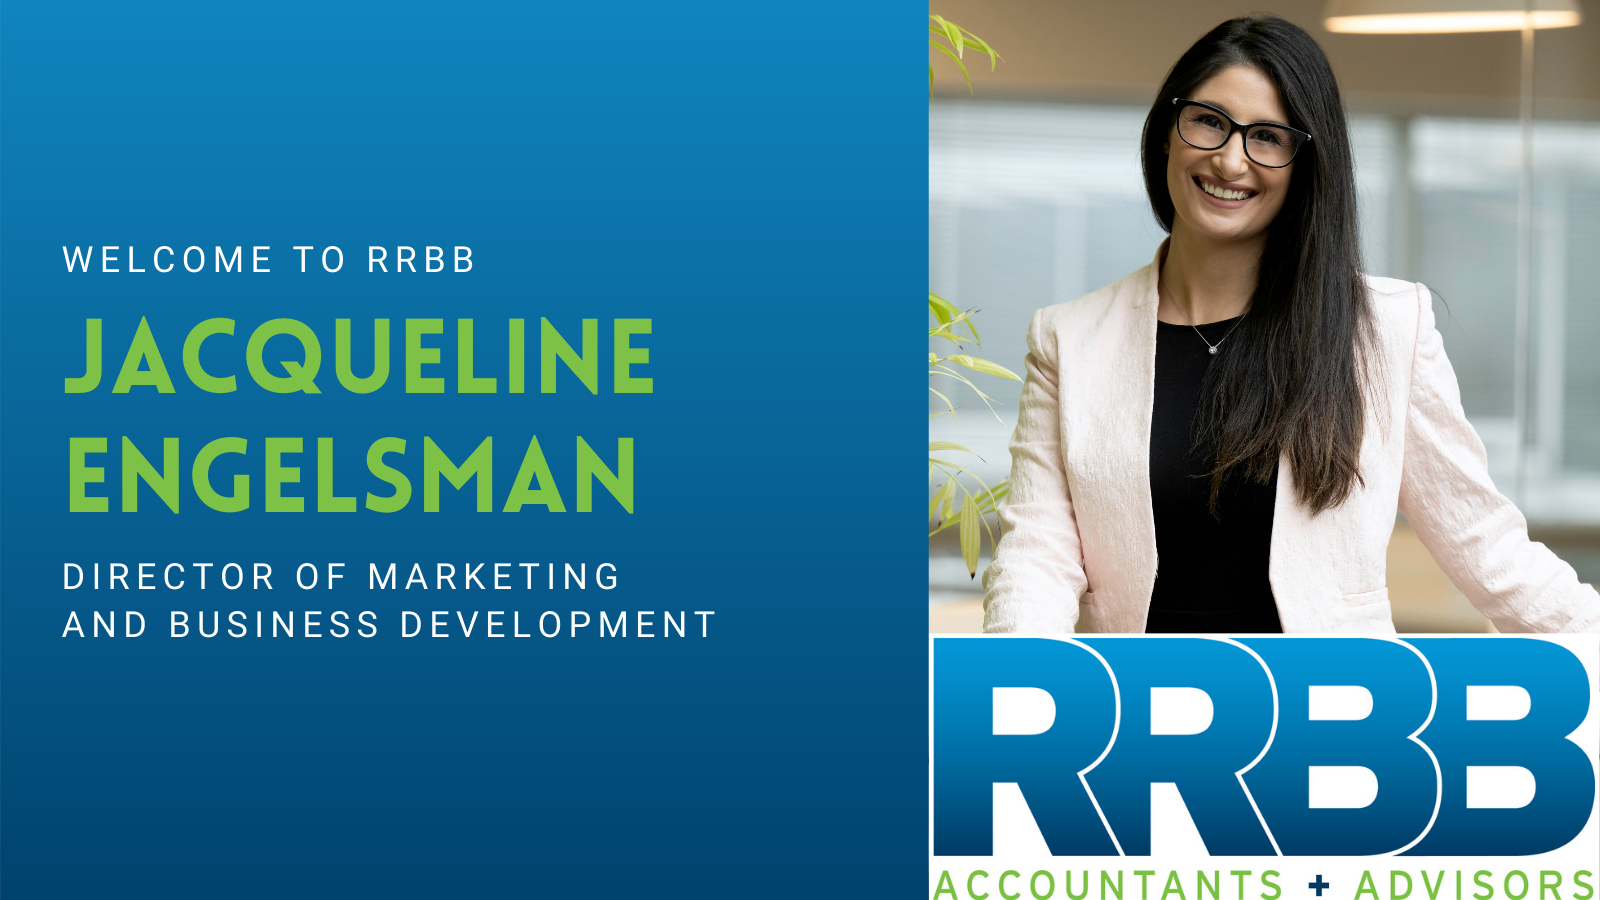 RRBB Concentrates on Marketing and Business Development Efforts, Hires Jacqueline Engelsman Image